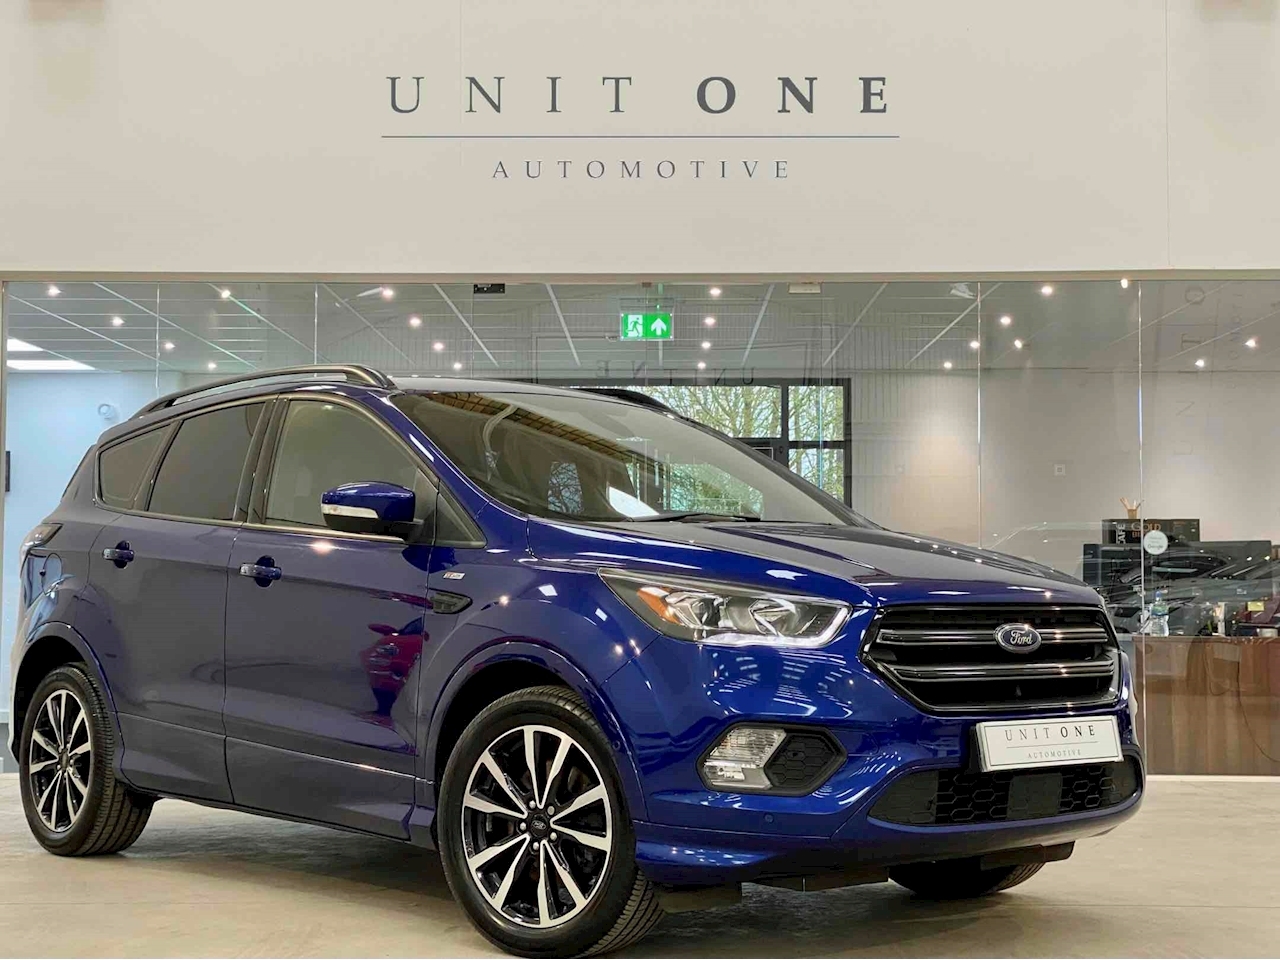 2.0 TDCi EcoBlue ST-Line SUV 5dr Diesel Manual (s/s) (150 ps)